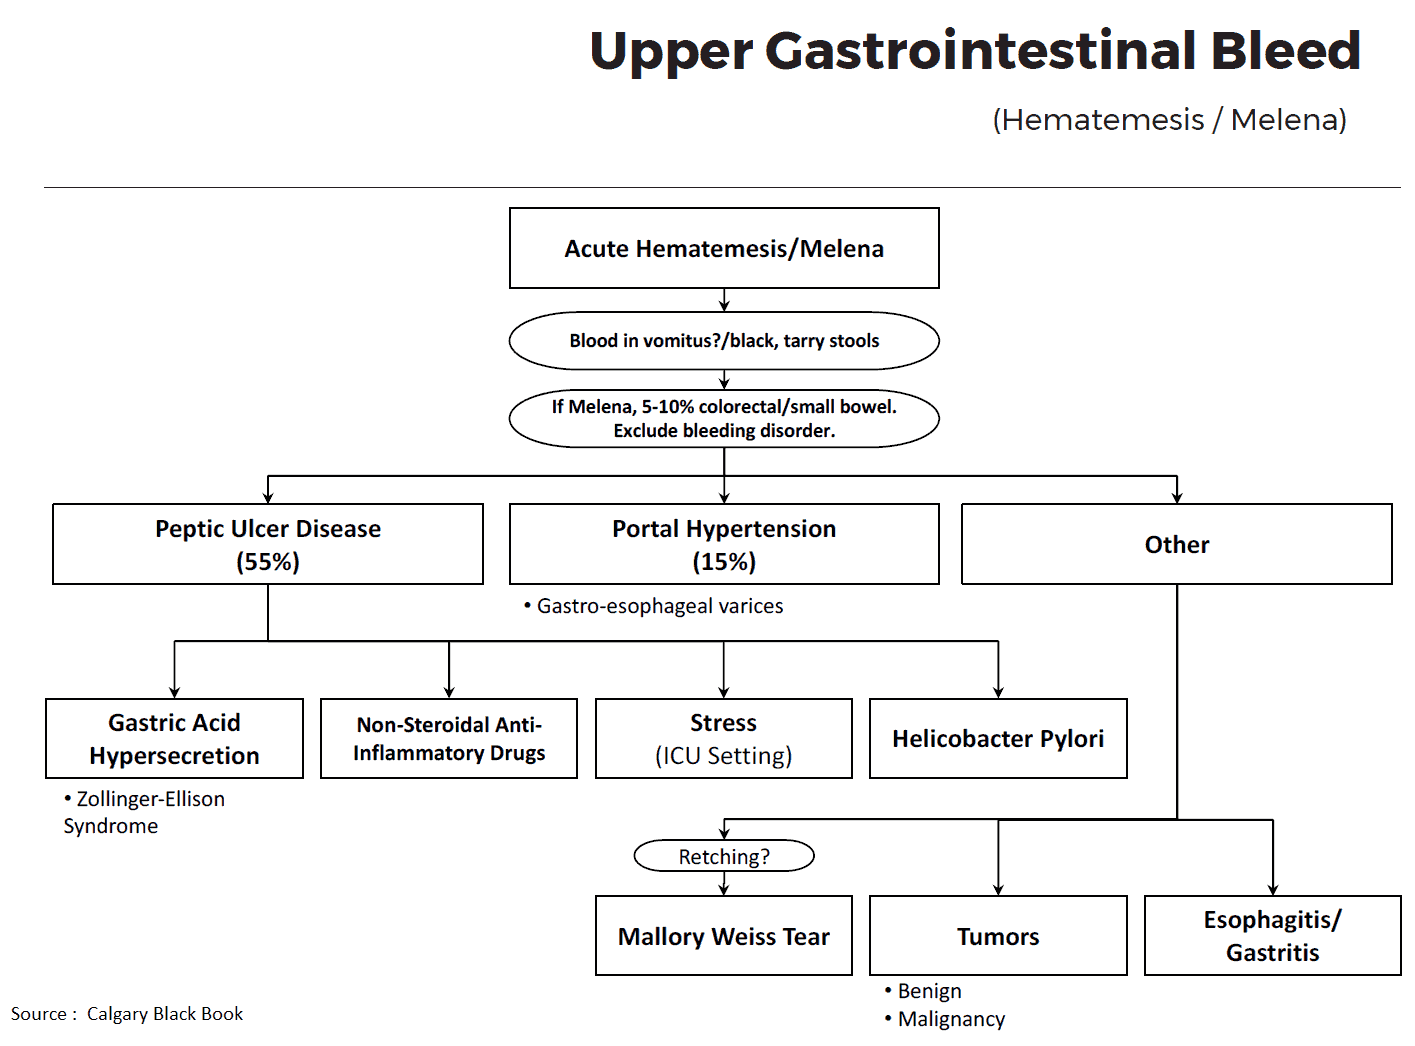 Upper Gastrointestinal Bleed - Causes